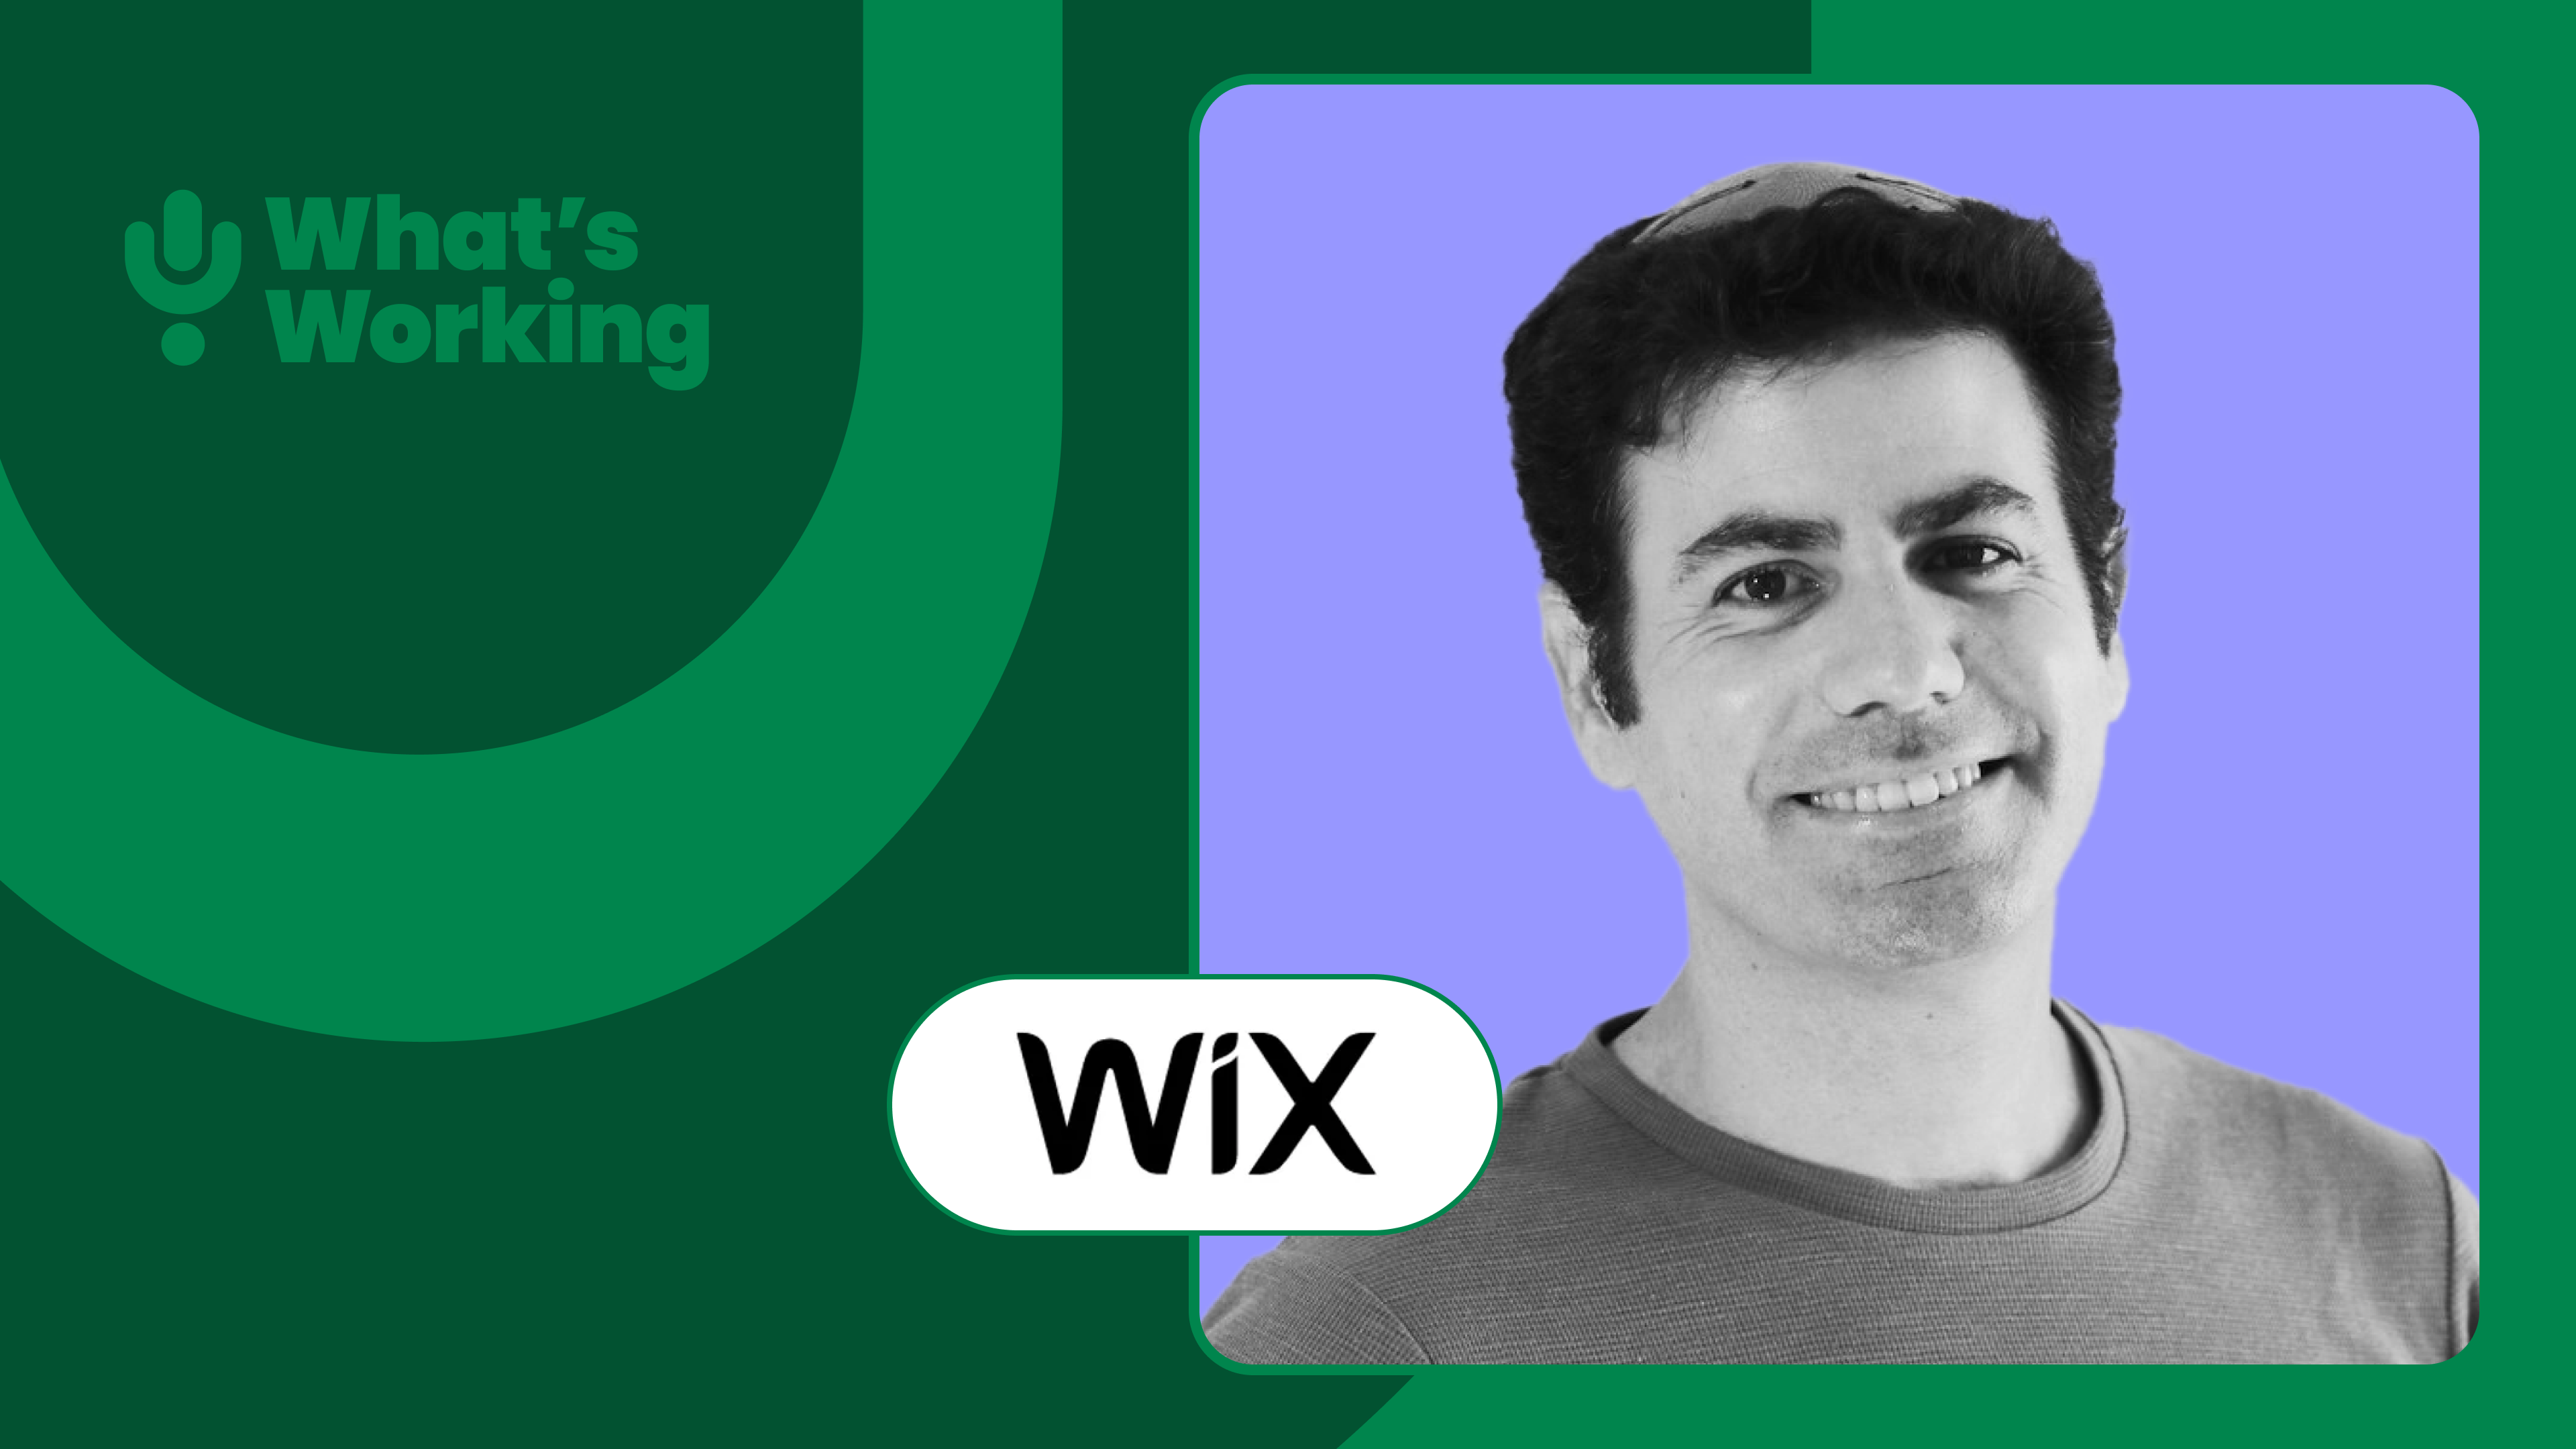 Talking with Wix: Personal branding, communities and why you need both